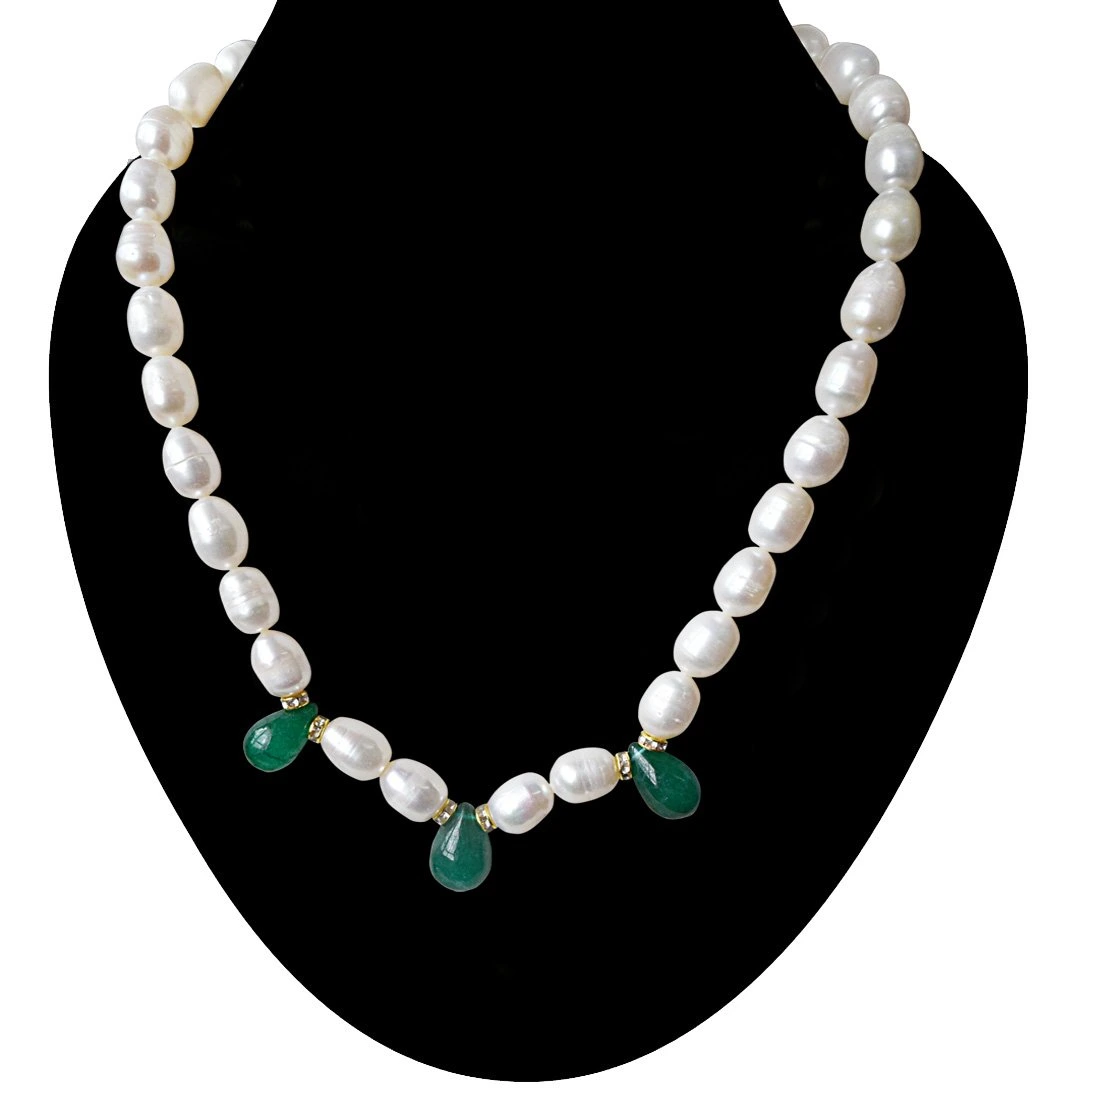 Single Line Drop Green Onyx, Stone Ring and Big Elongated Pearl Necklace for Women (SN916)